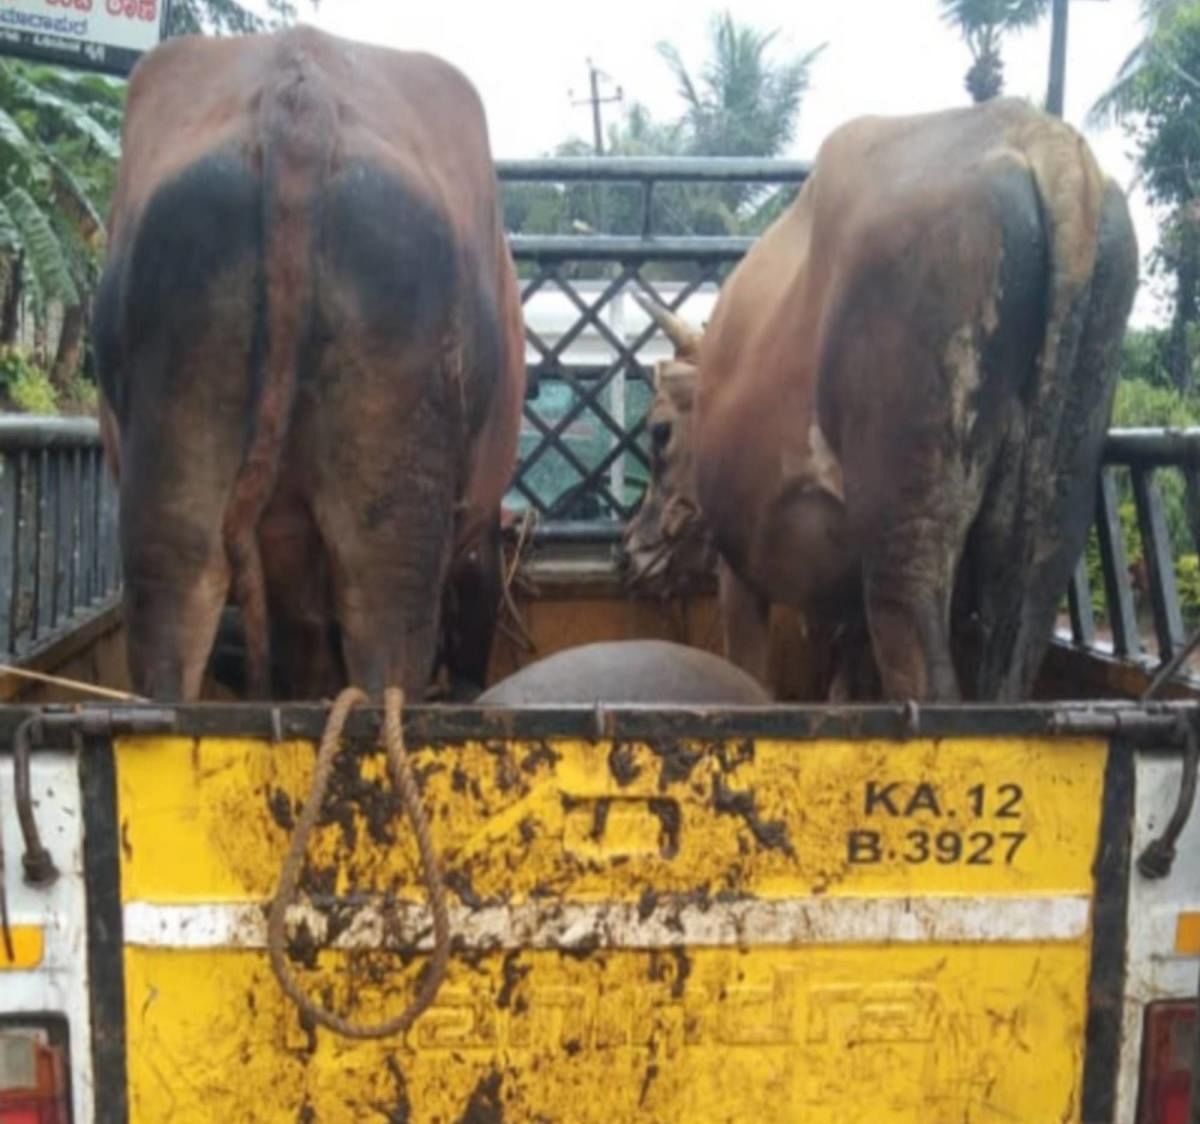 Two held for illegal cattle transportation